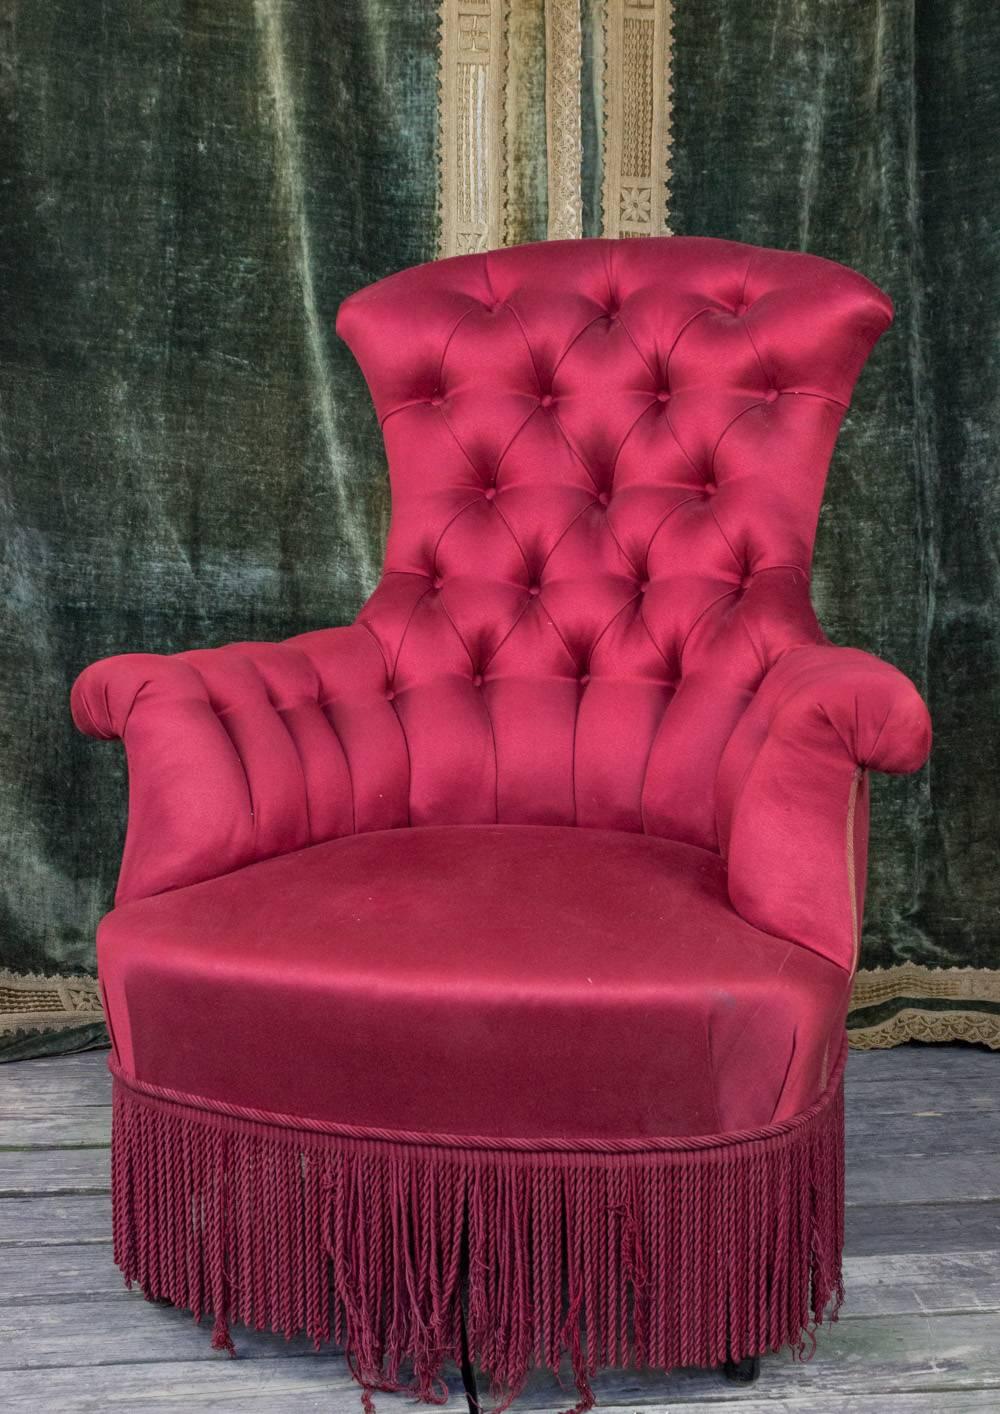 High back tufted Napoleon III chair in red satin with matching bouillon fringe, French, 19th century.

Not for sale. Rental only.